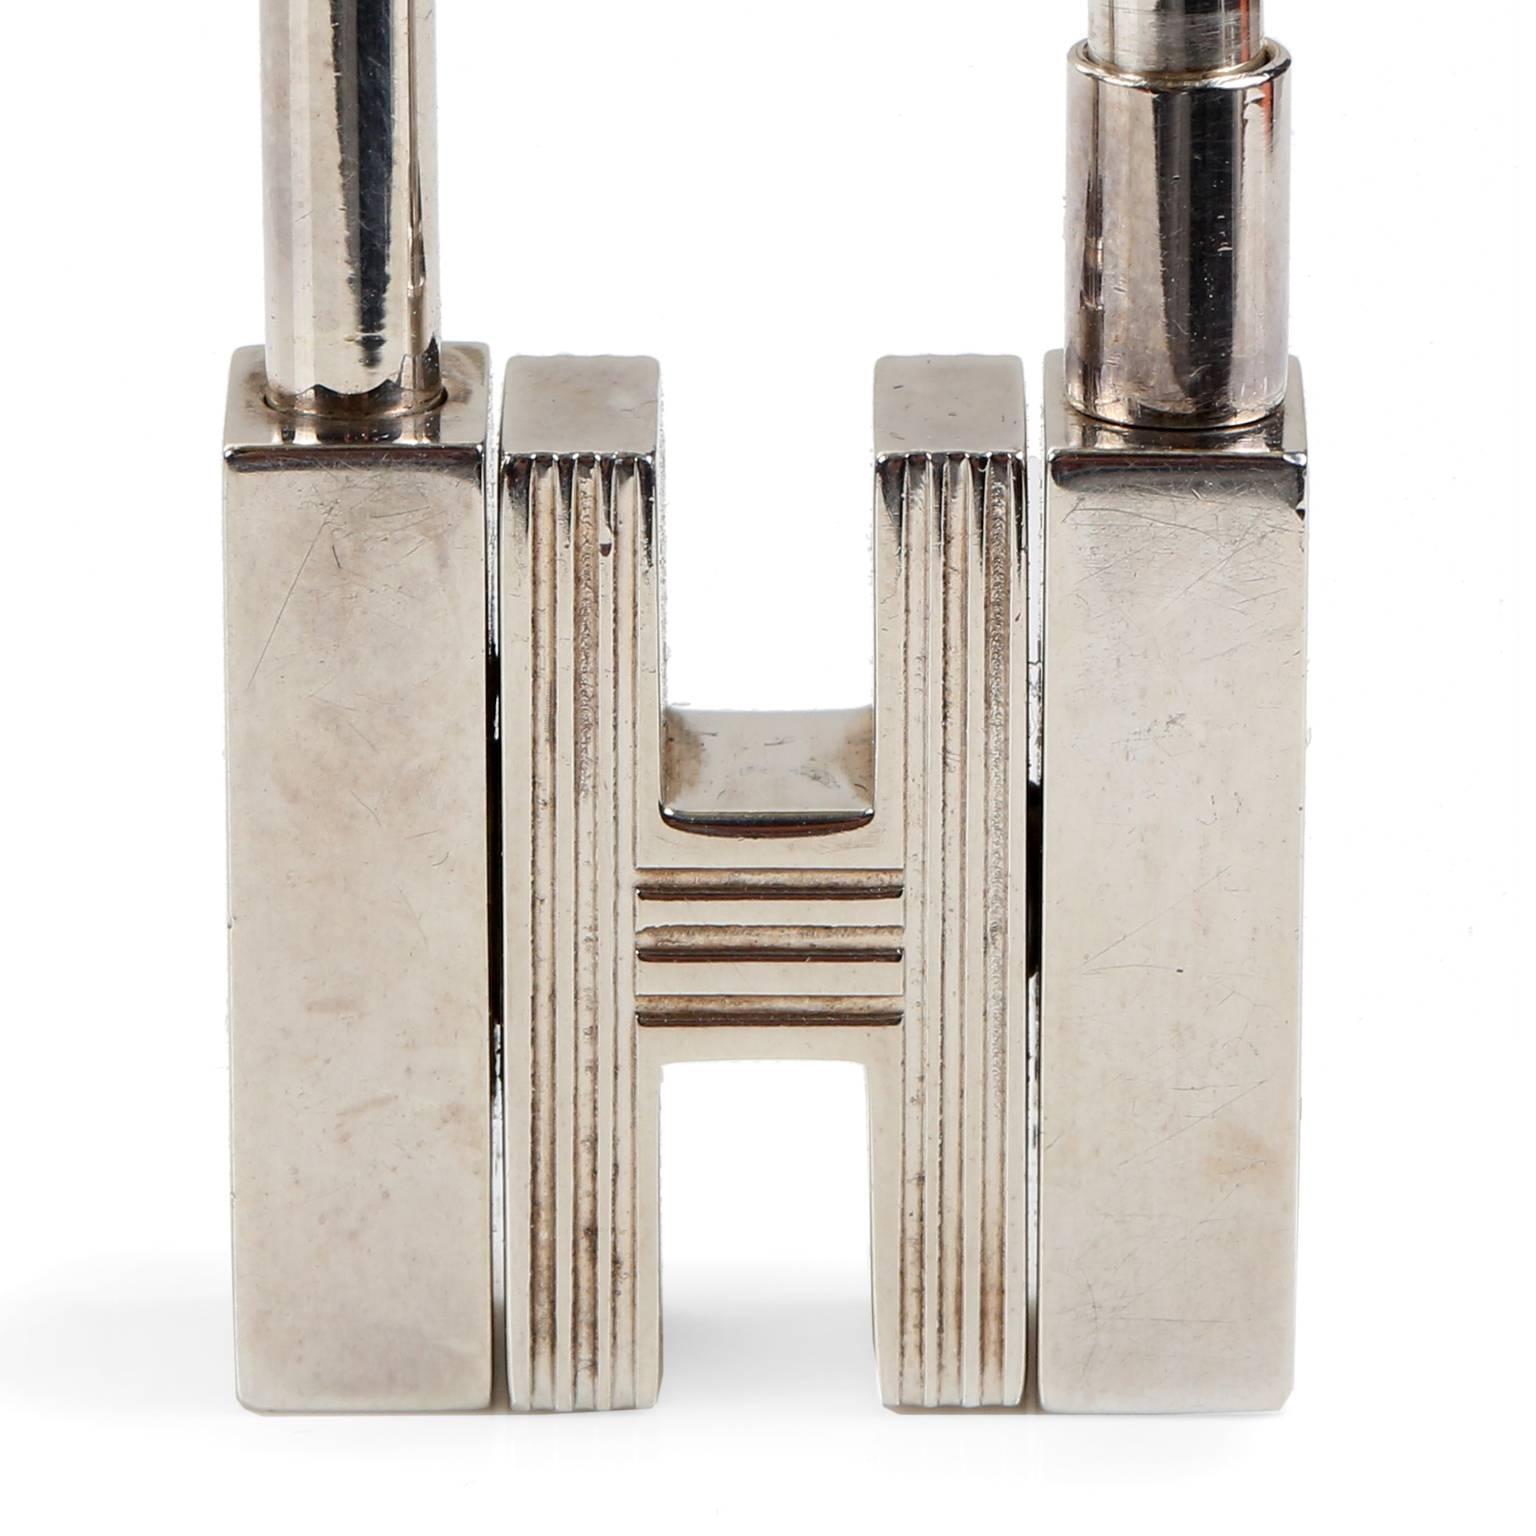 Hermes H Cadena Lock Charm- Silver Tone In Excellent Condition For Sale In Malibu, CA